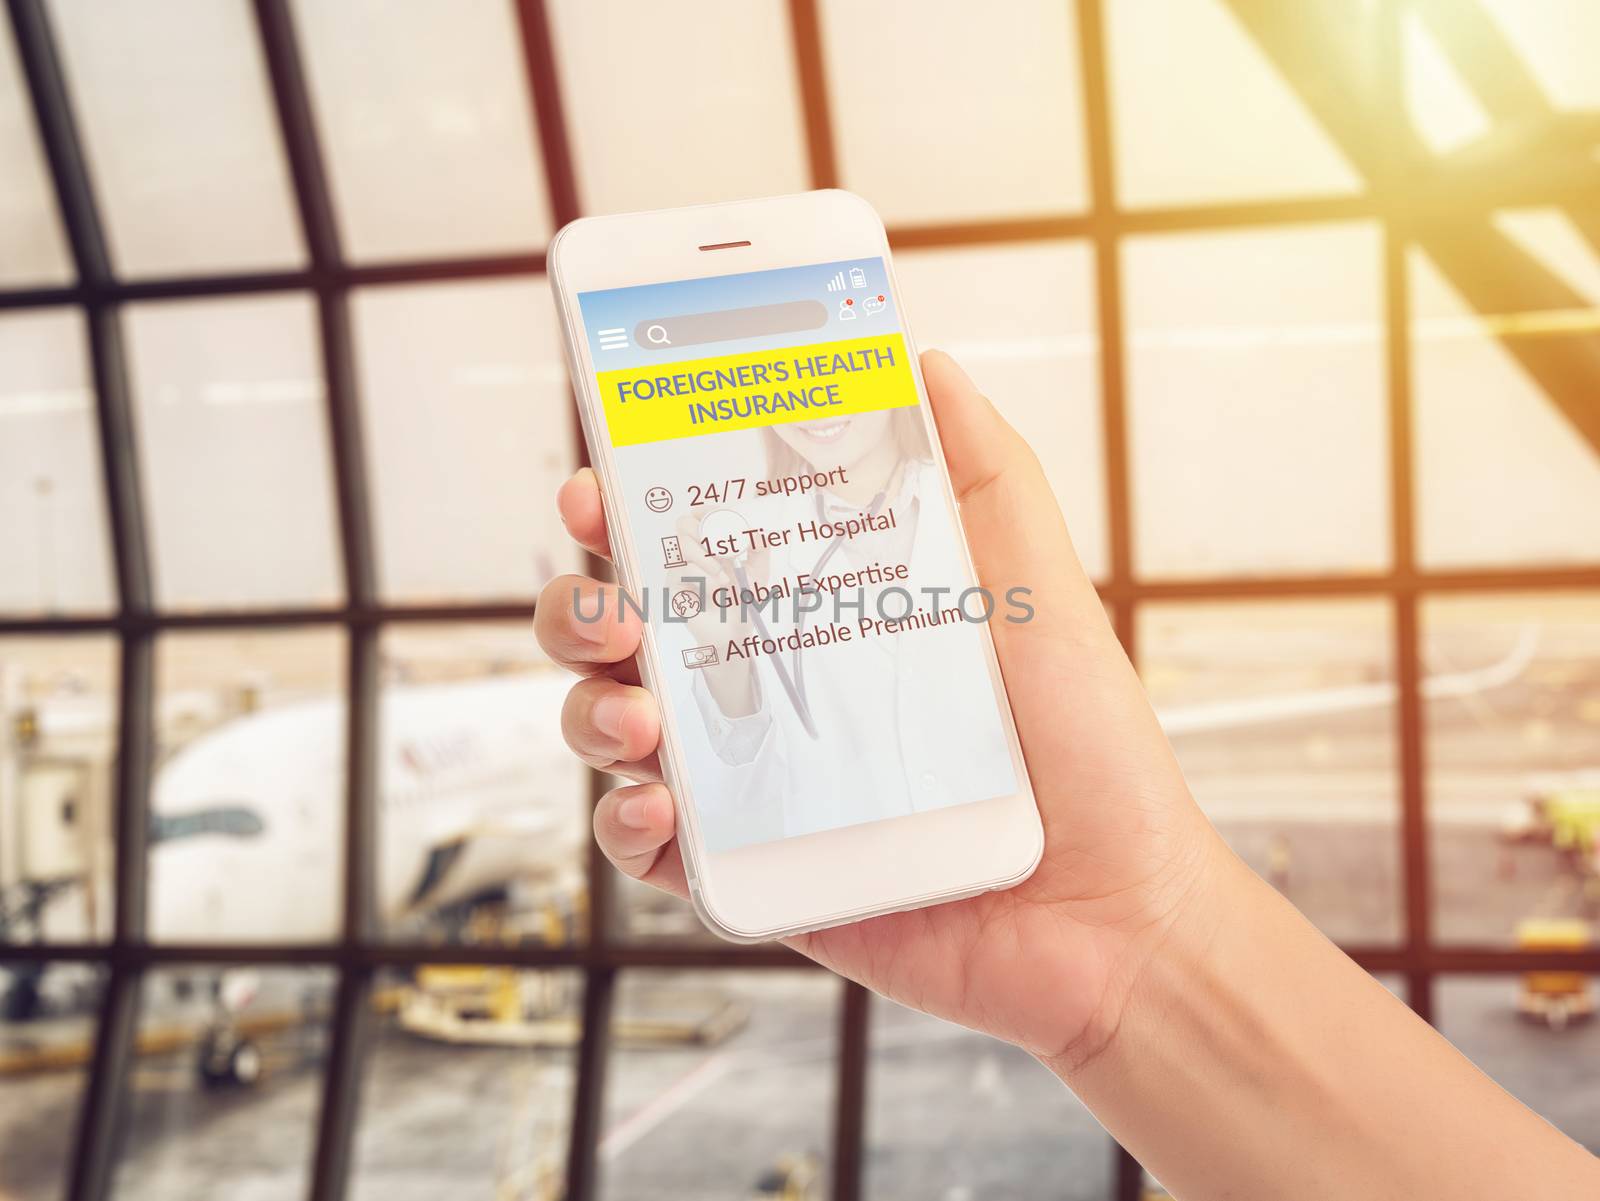 hand holding mobile phone with advertising screen for foreigner's health insurance application with good service and covered benefit condition, airport terminal with airplane parking at background